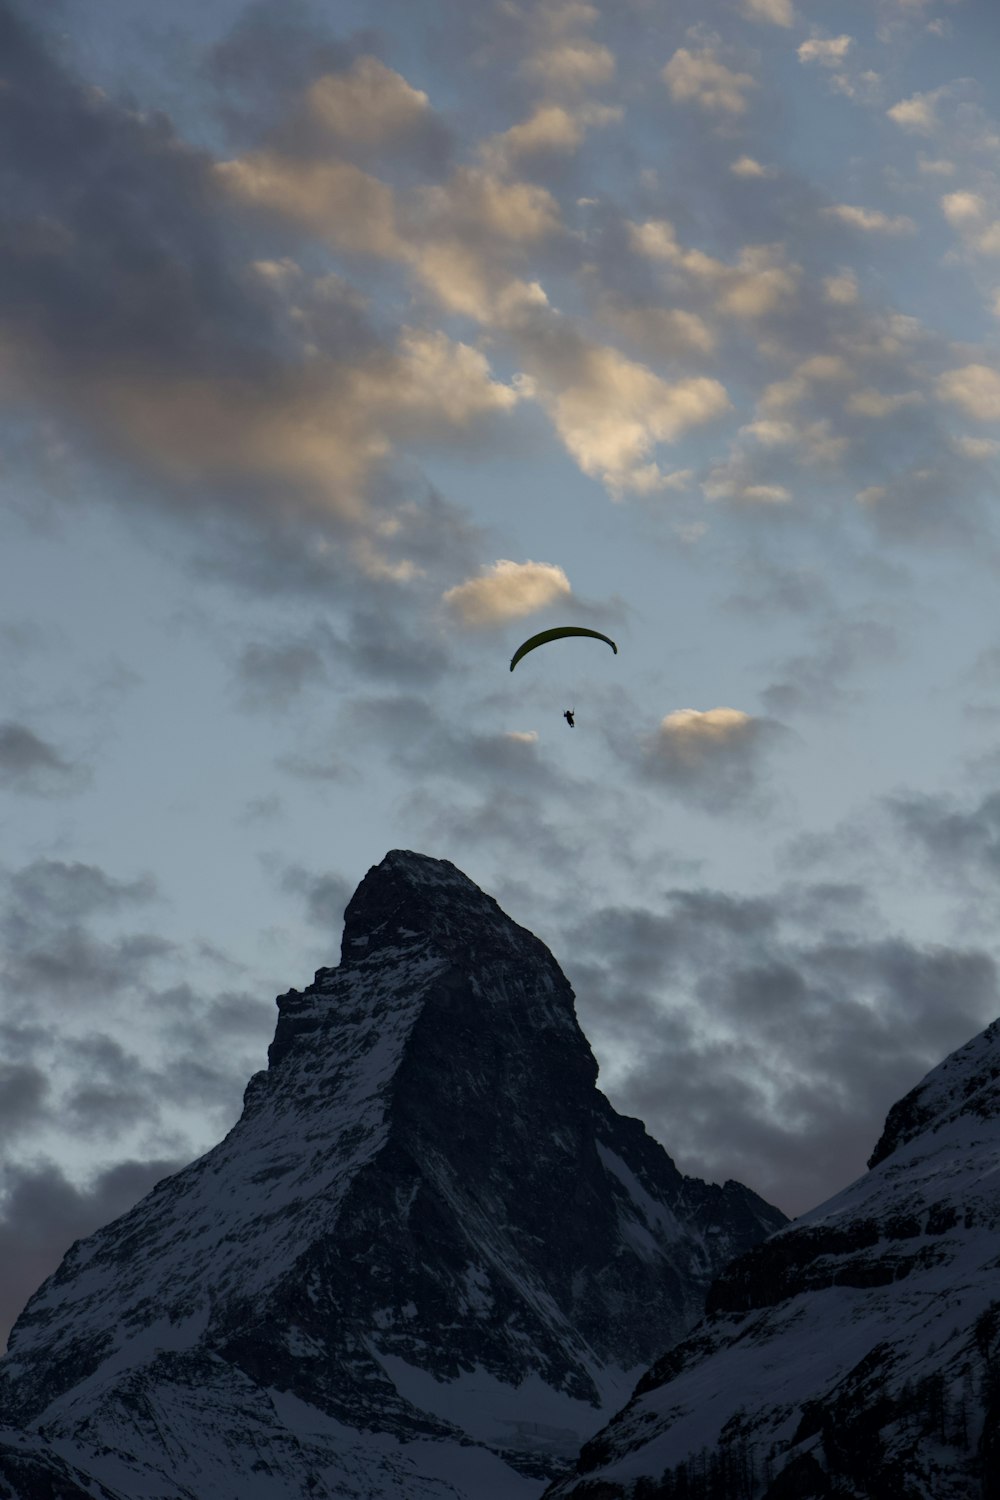 person in parachute over rocky mountain during daytime